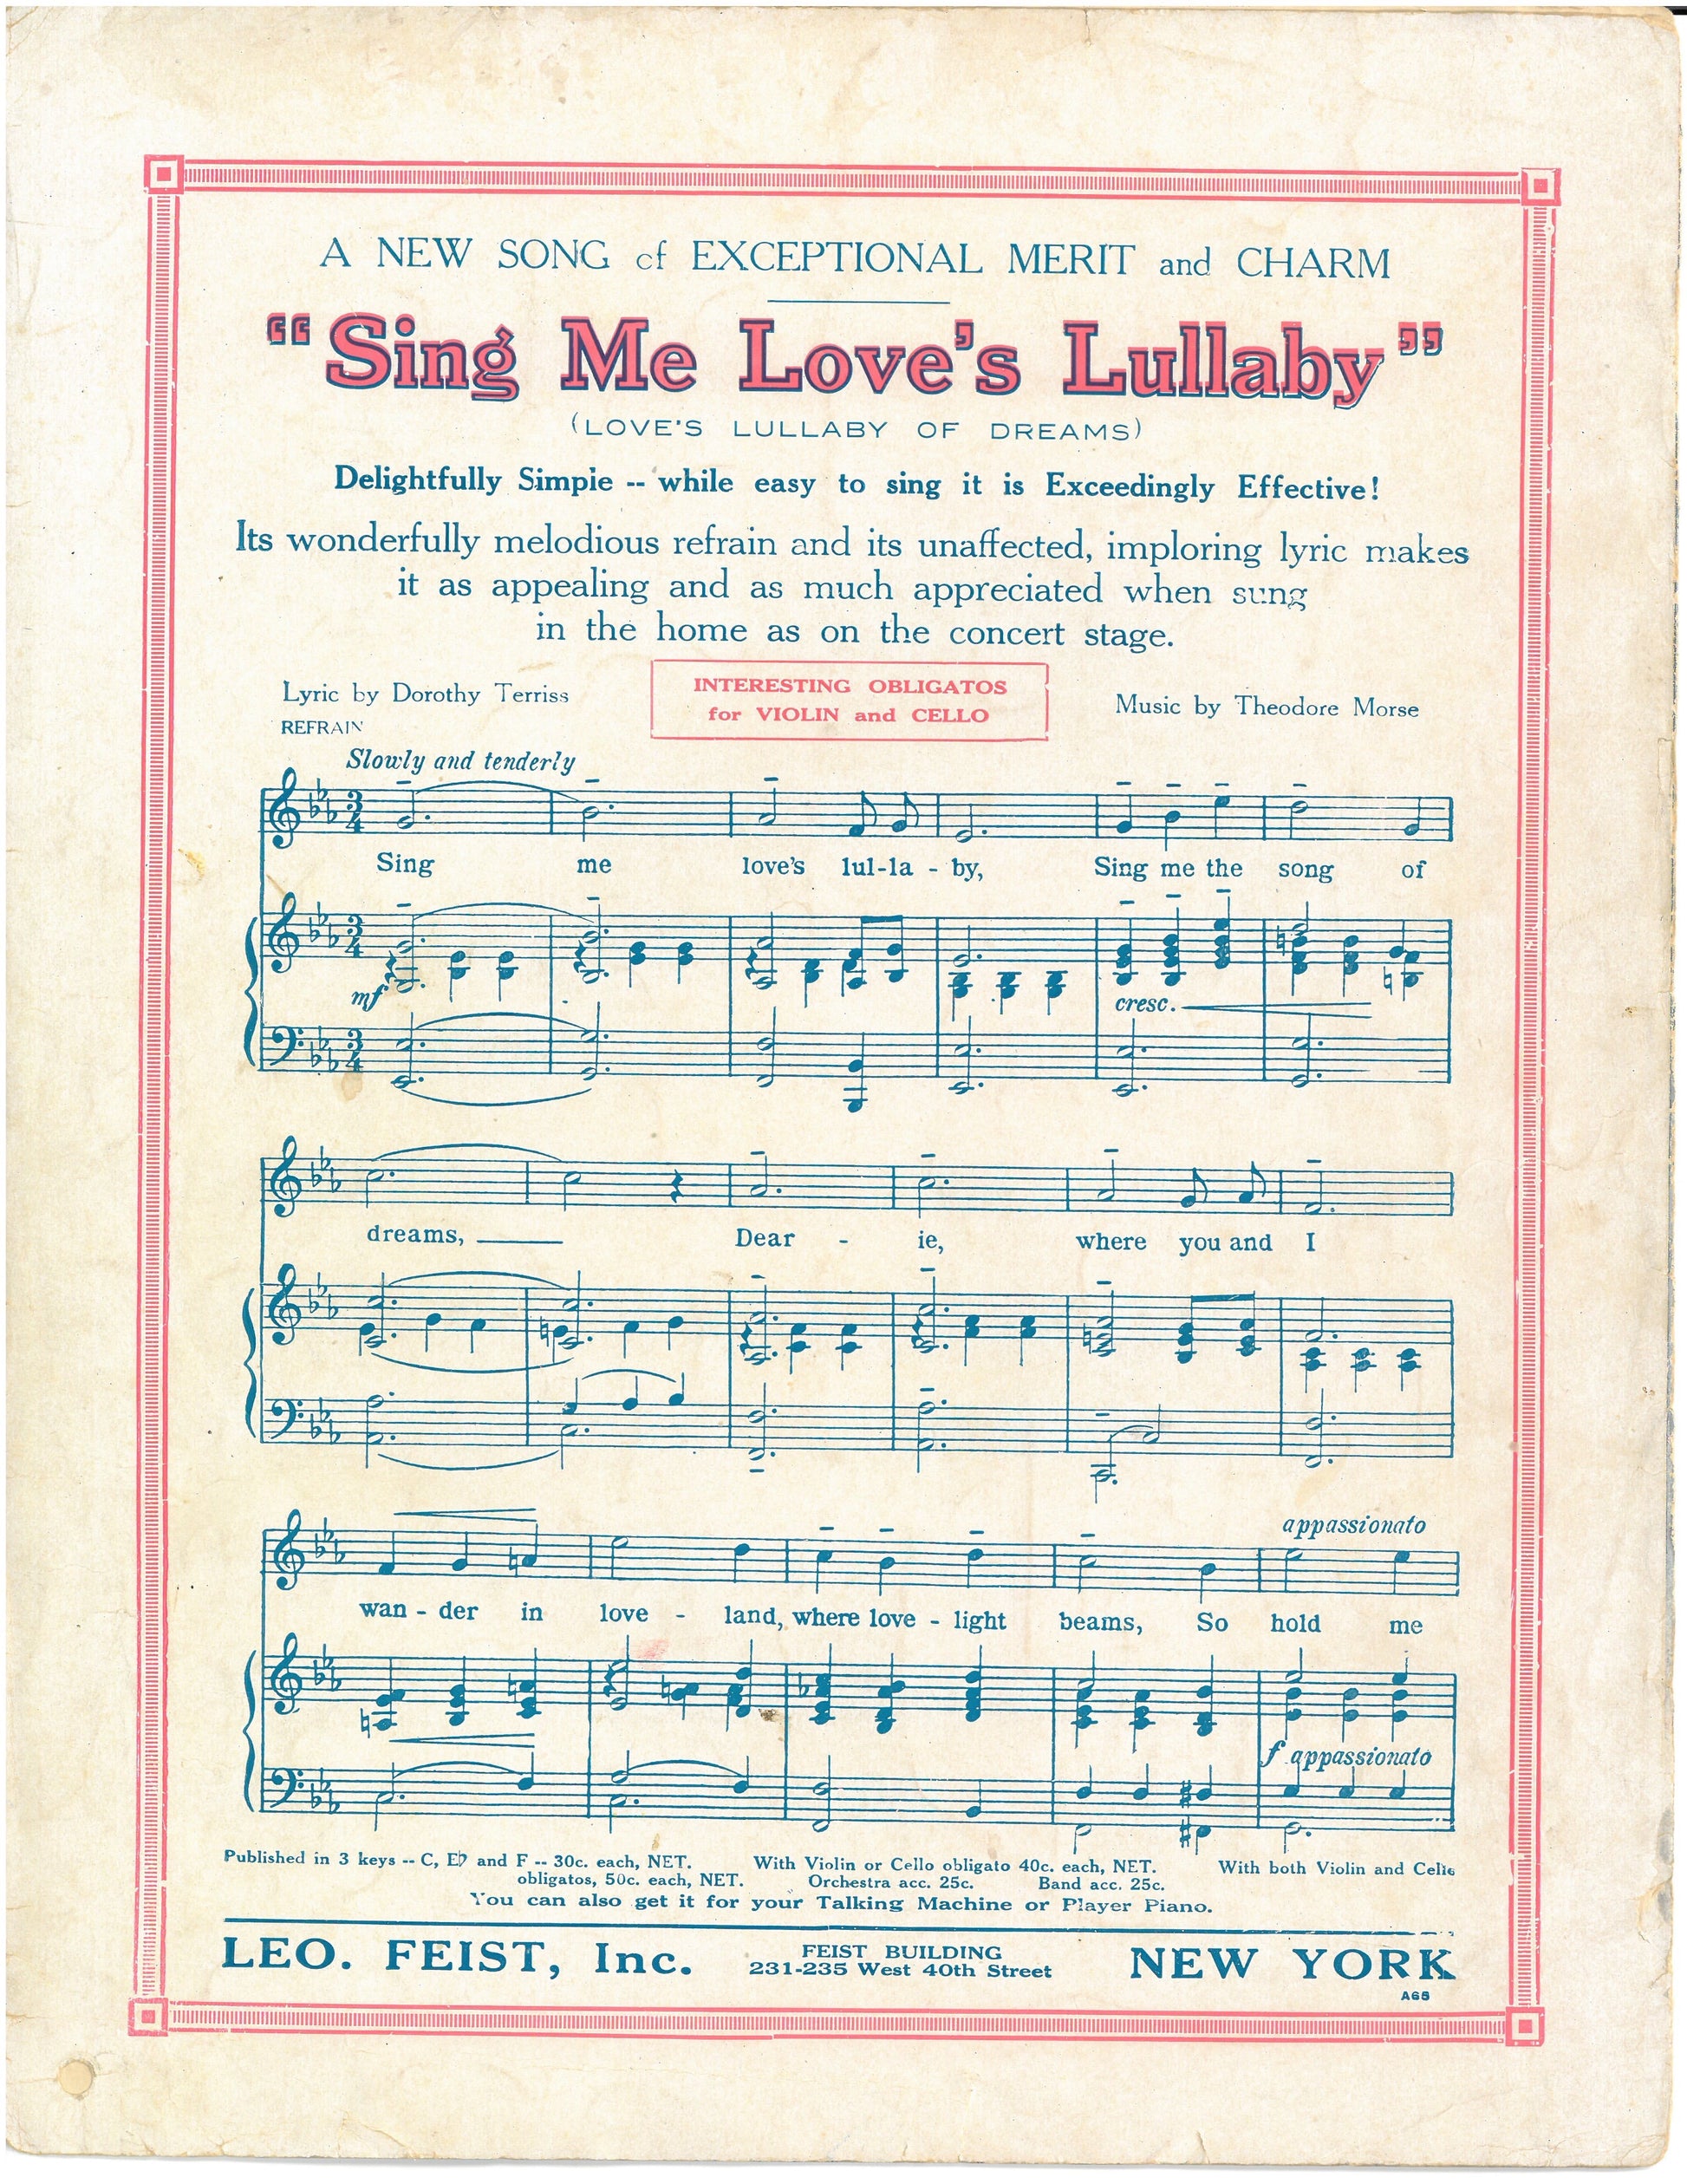 LOVE, HERE IS MY HEART Composed by Lao Silésu with Lyrics by Adrian Ross ©1915